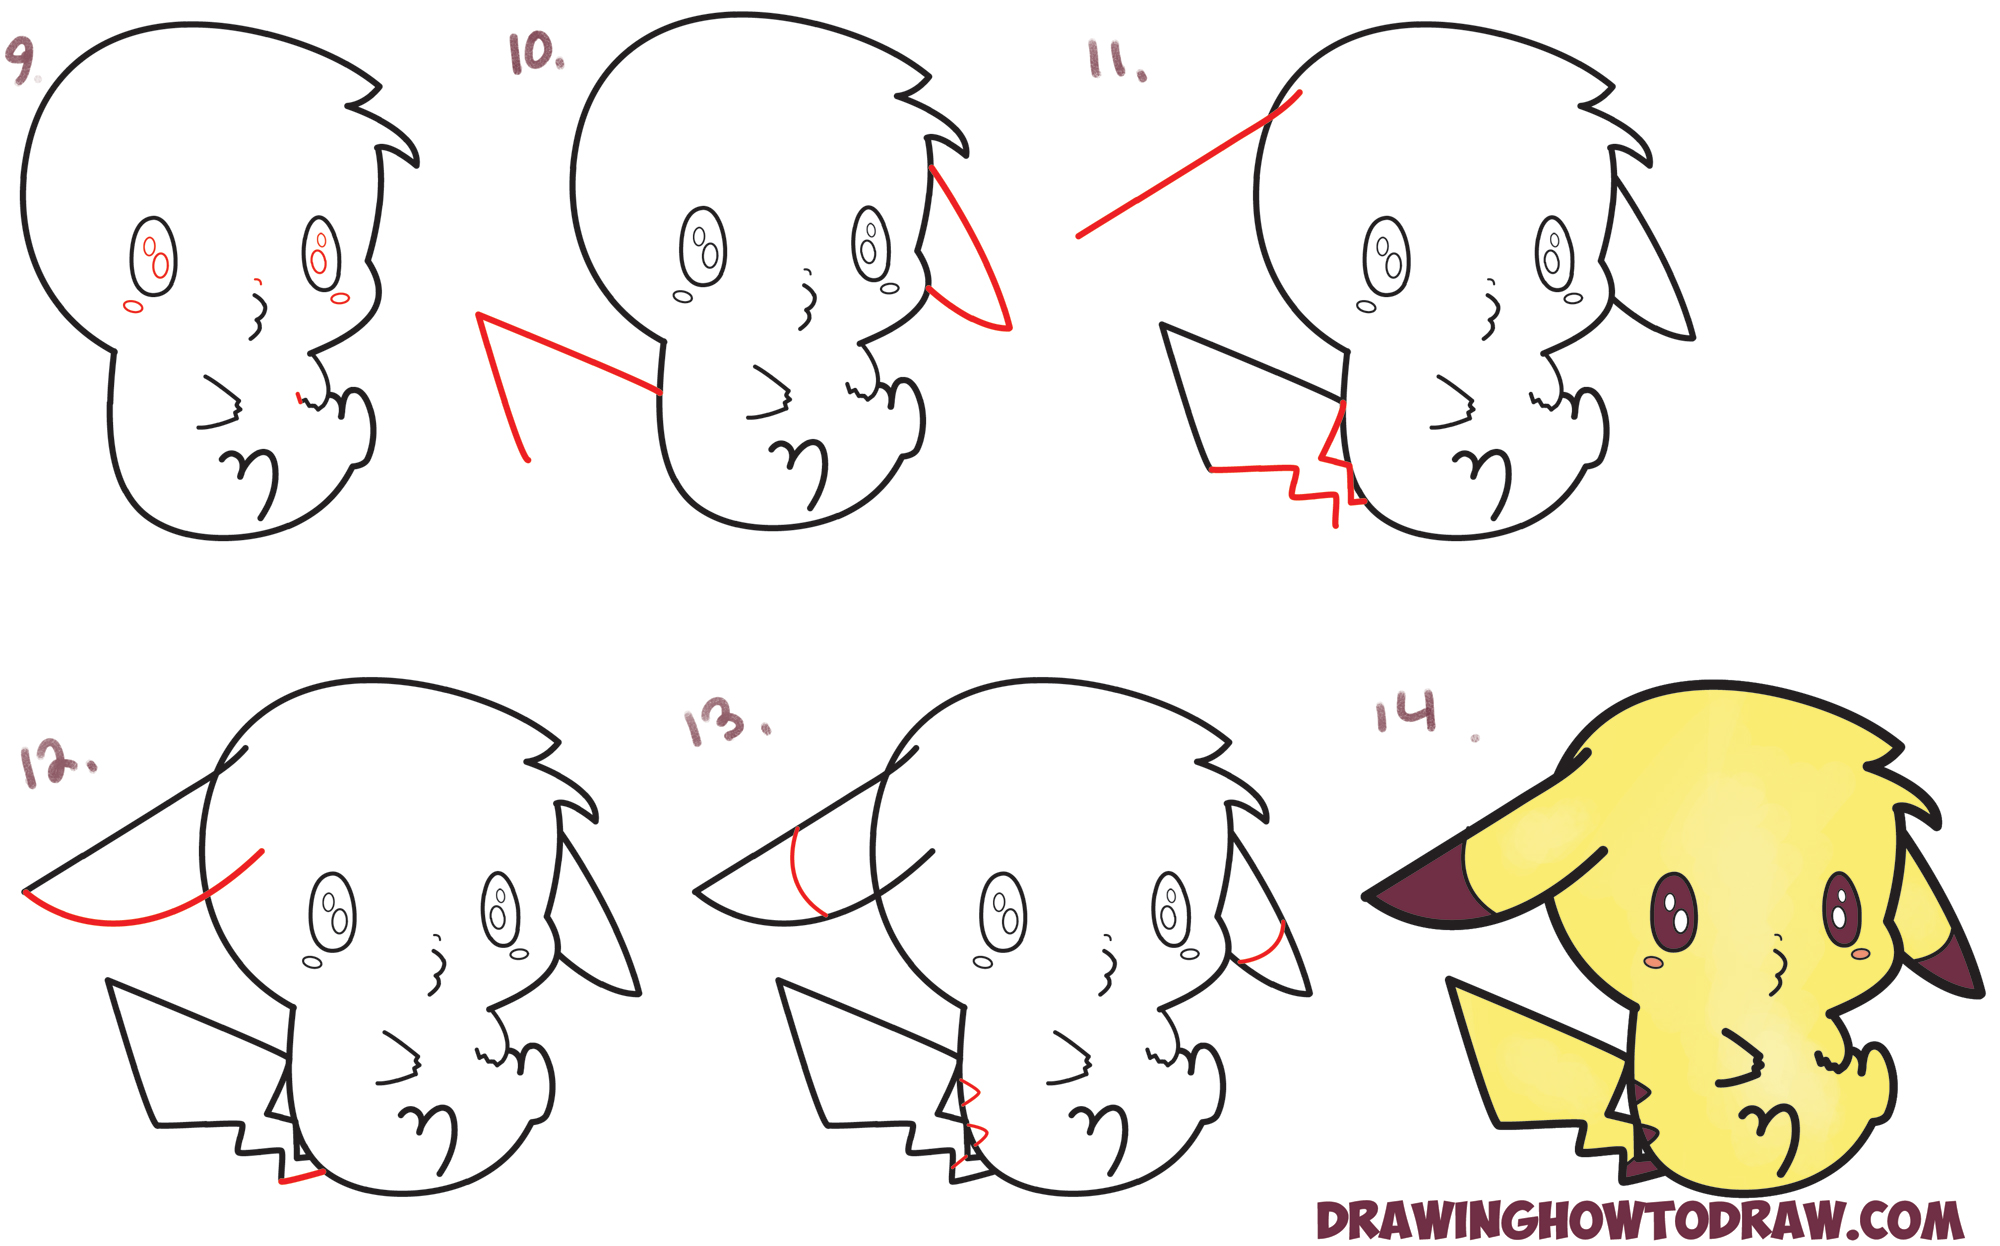 Amazing How To Draw Chibi Step By Step in the world Check it out now 